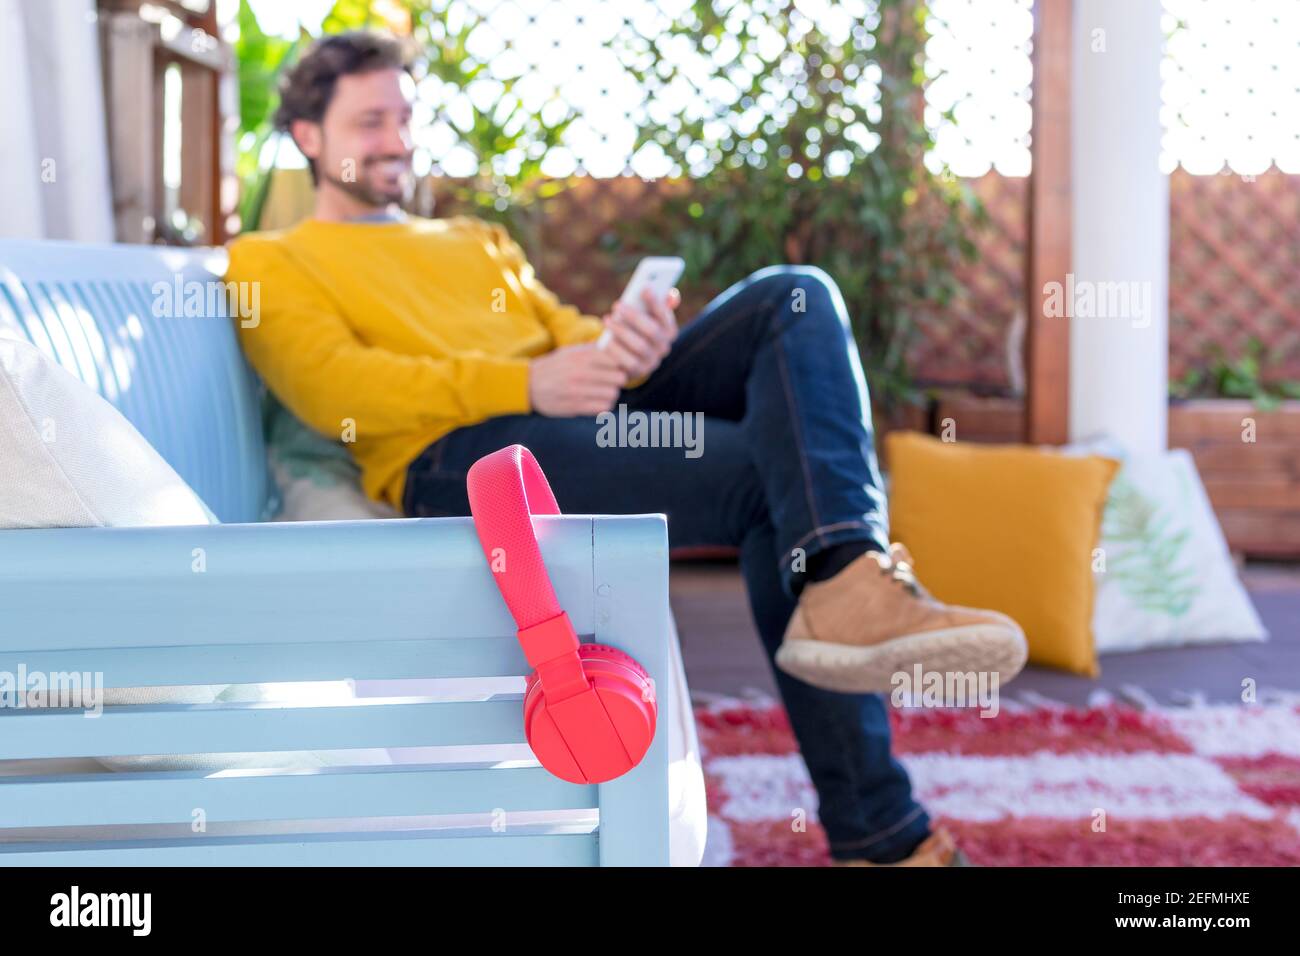 Unfocus and unrecognizable smiling man with red headphones in the foreground and a mobile phone Stock Photo